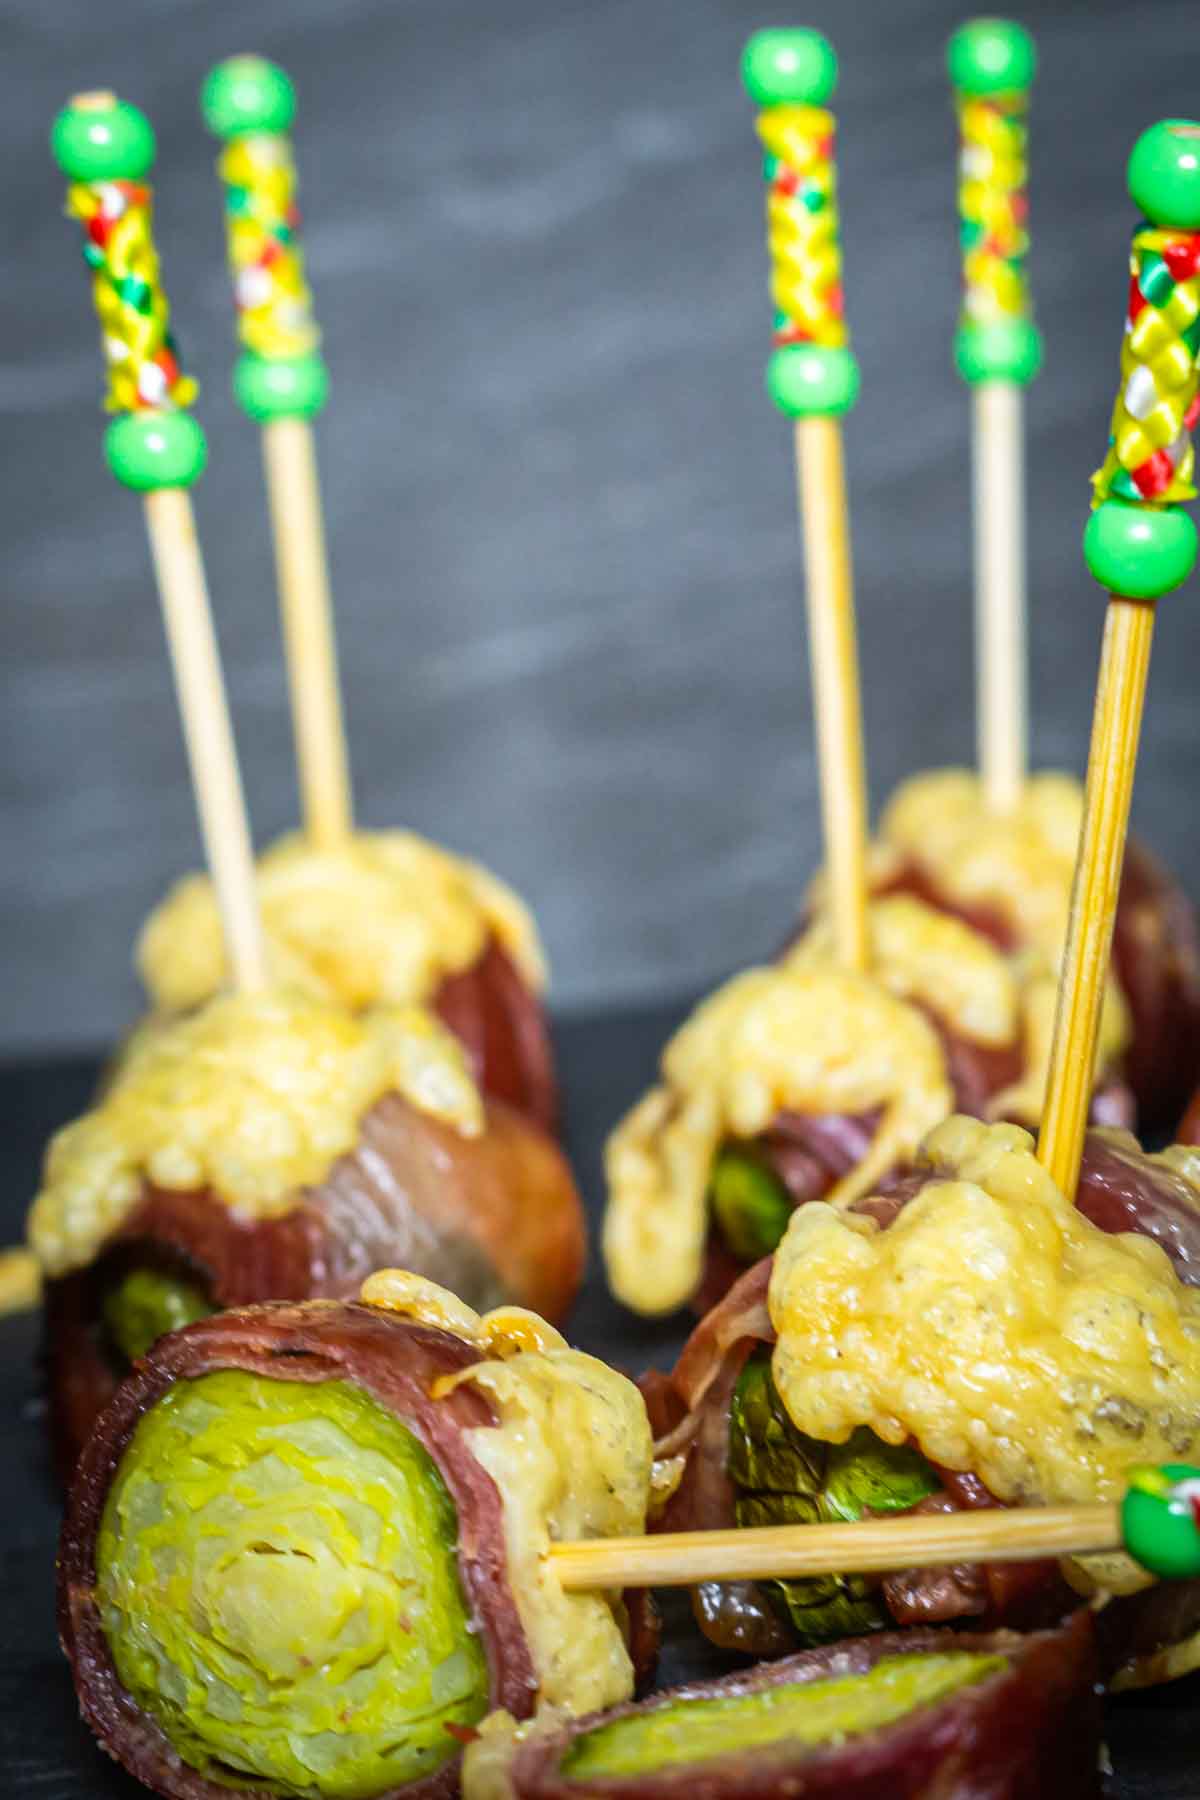 Brussels sprouts wrapped in bacon on a stick.